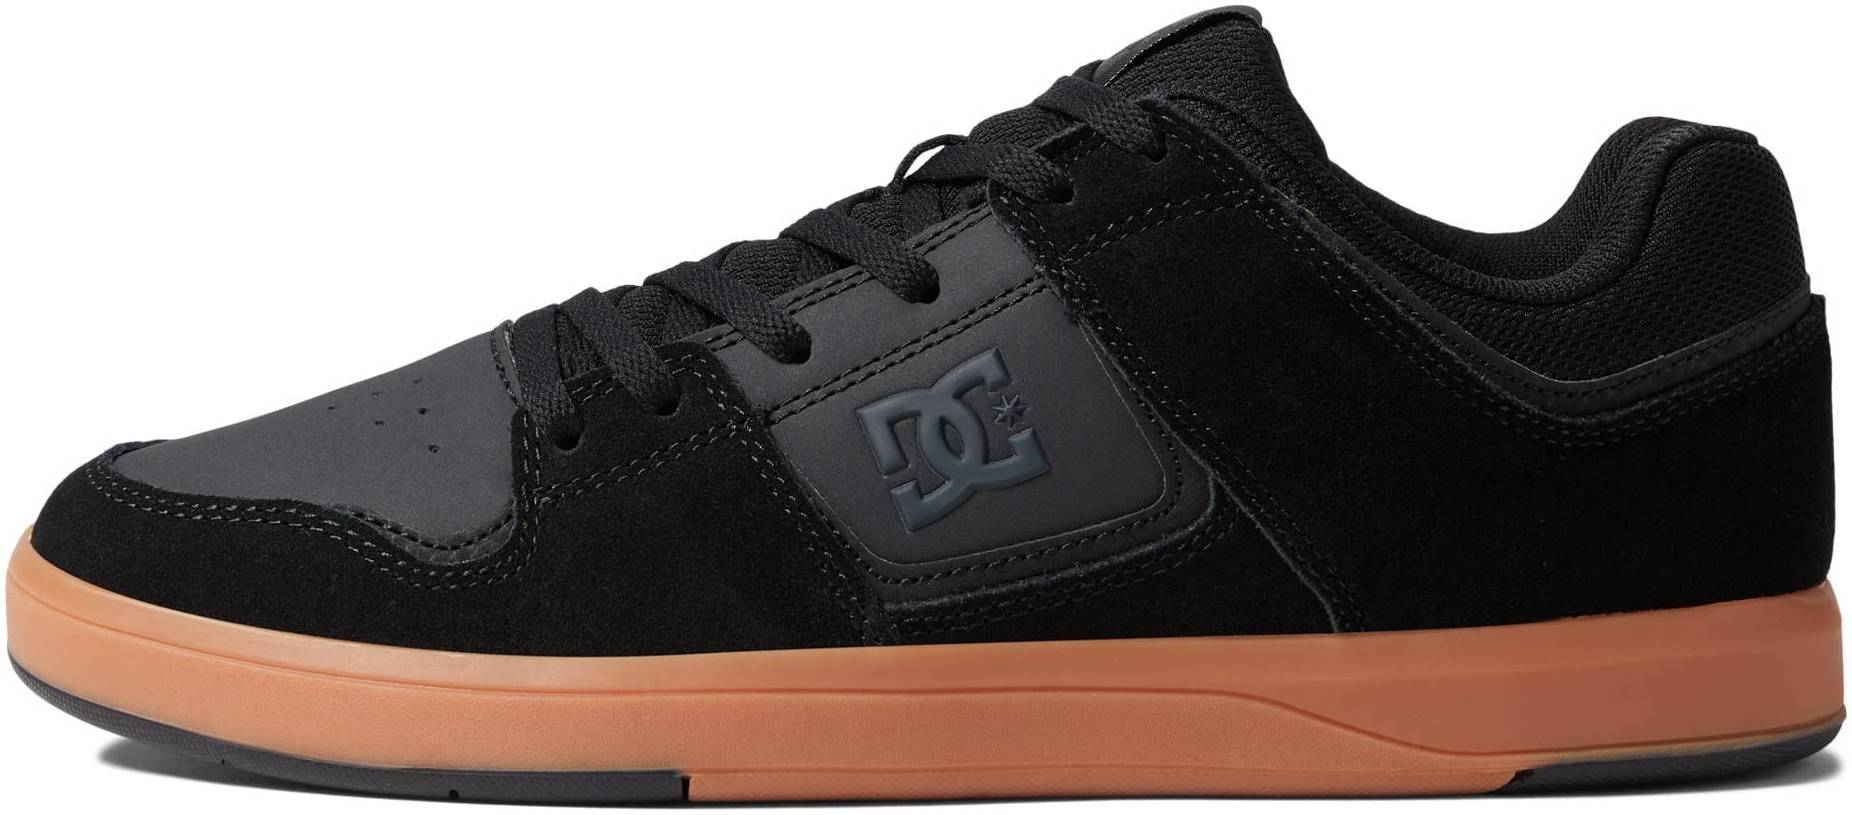 New DC Shoes Mens Hi Top Athletic sneaker skate shoes black red casual all  sizes